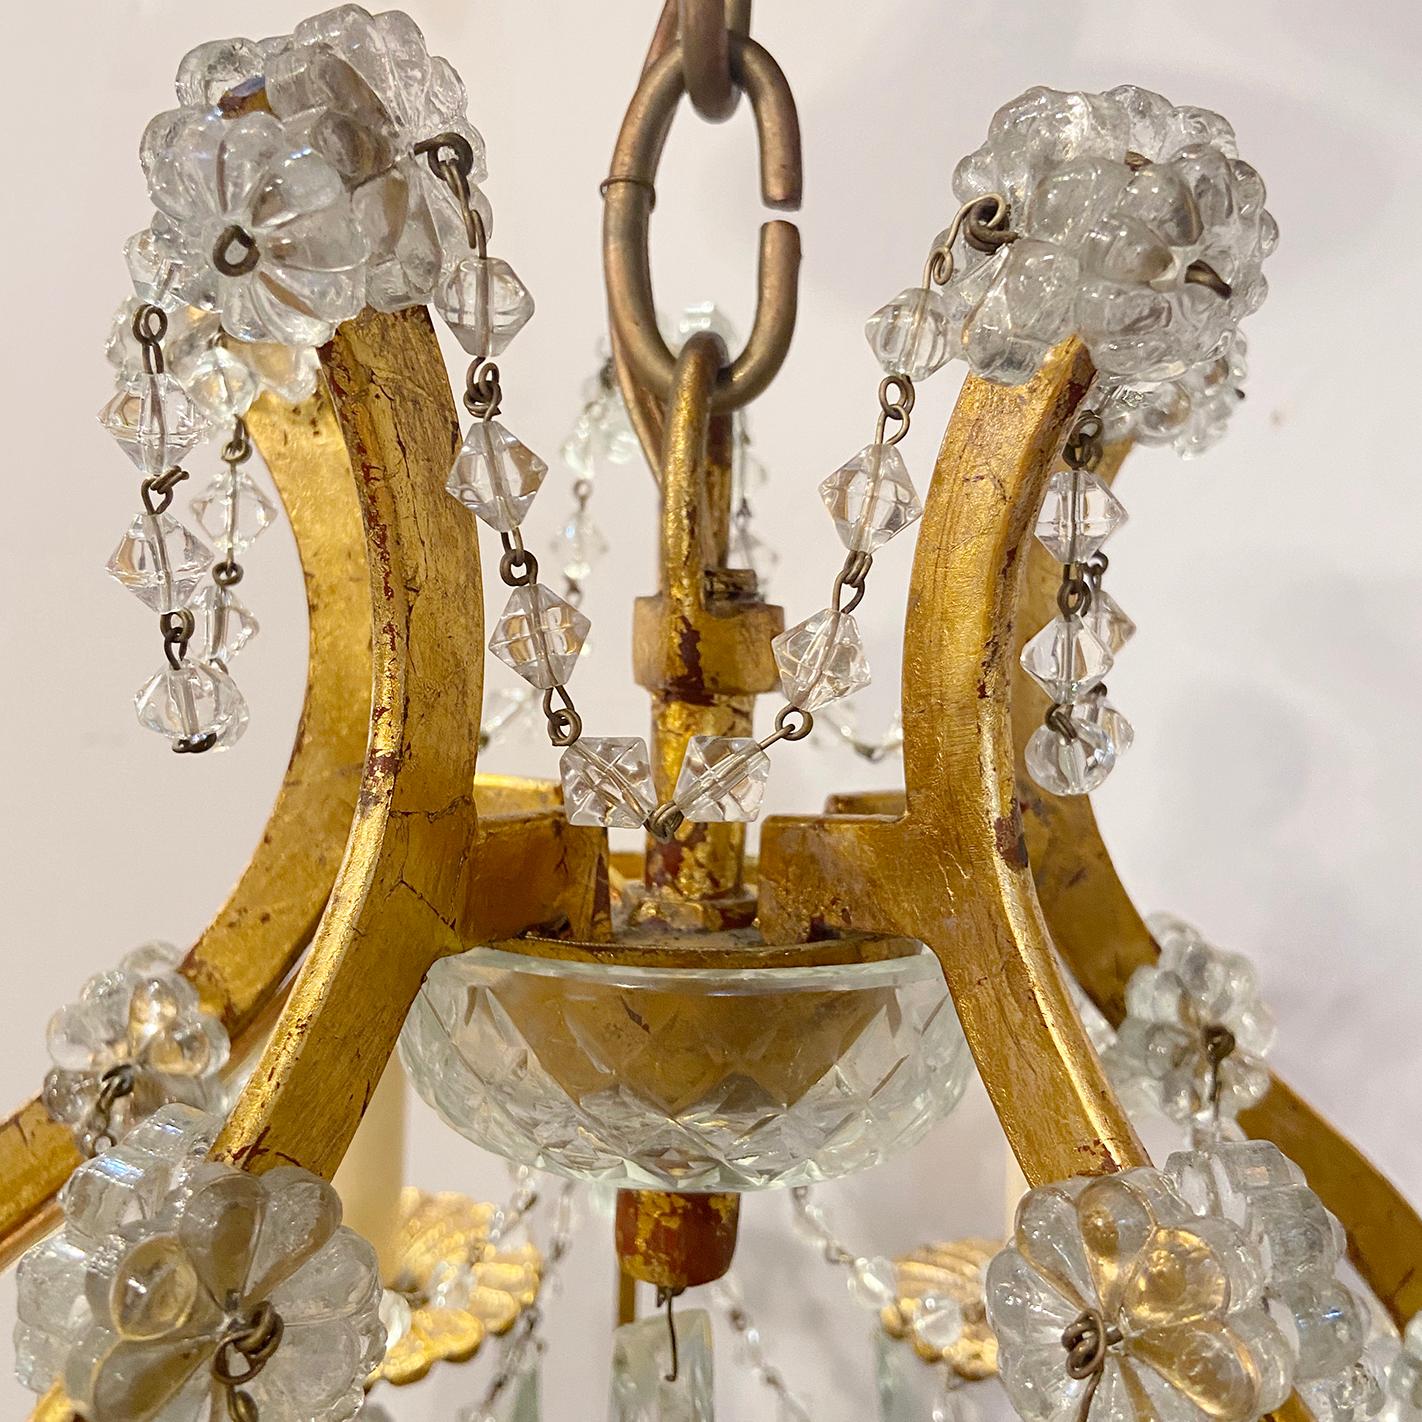 Set of three Italian circa 1930's gilt metal chandeliers with glass drops and beads. Sold individually.

Measurements:
Height: 24